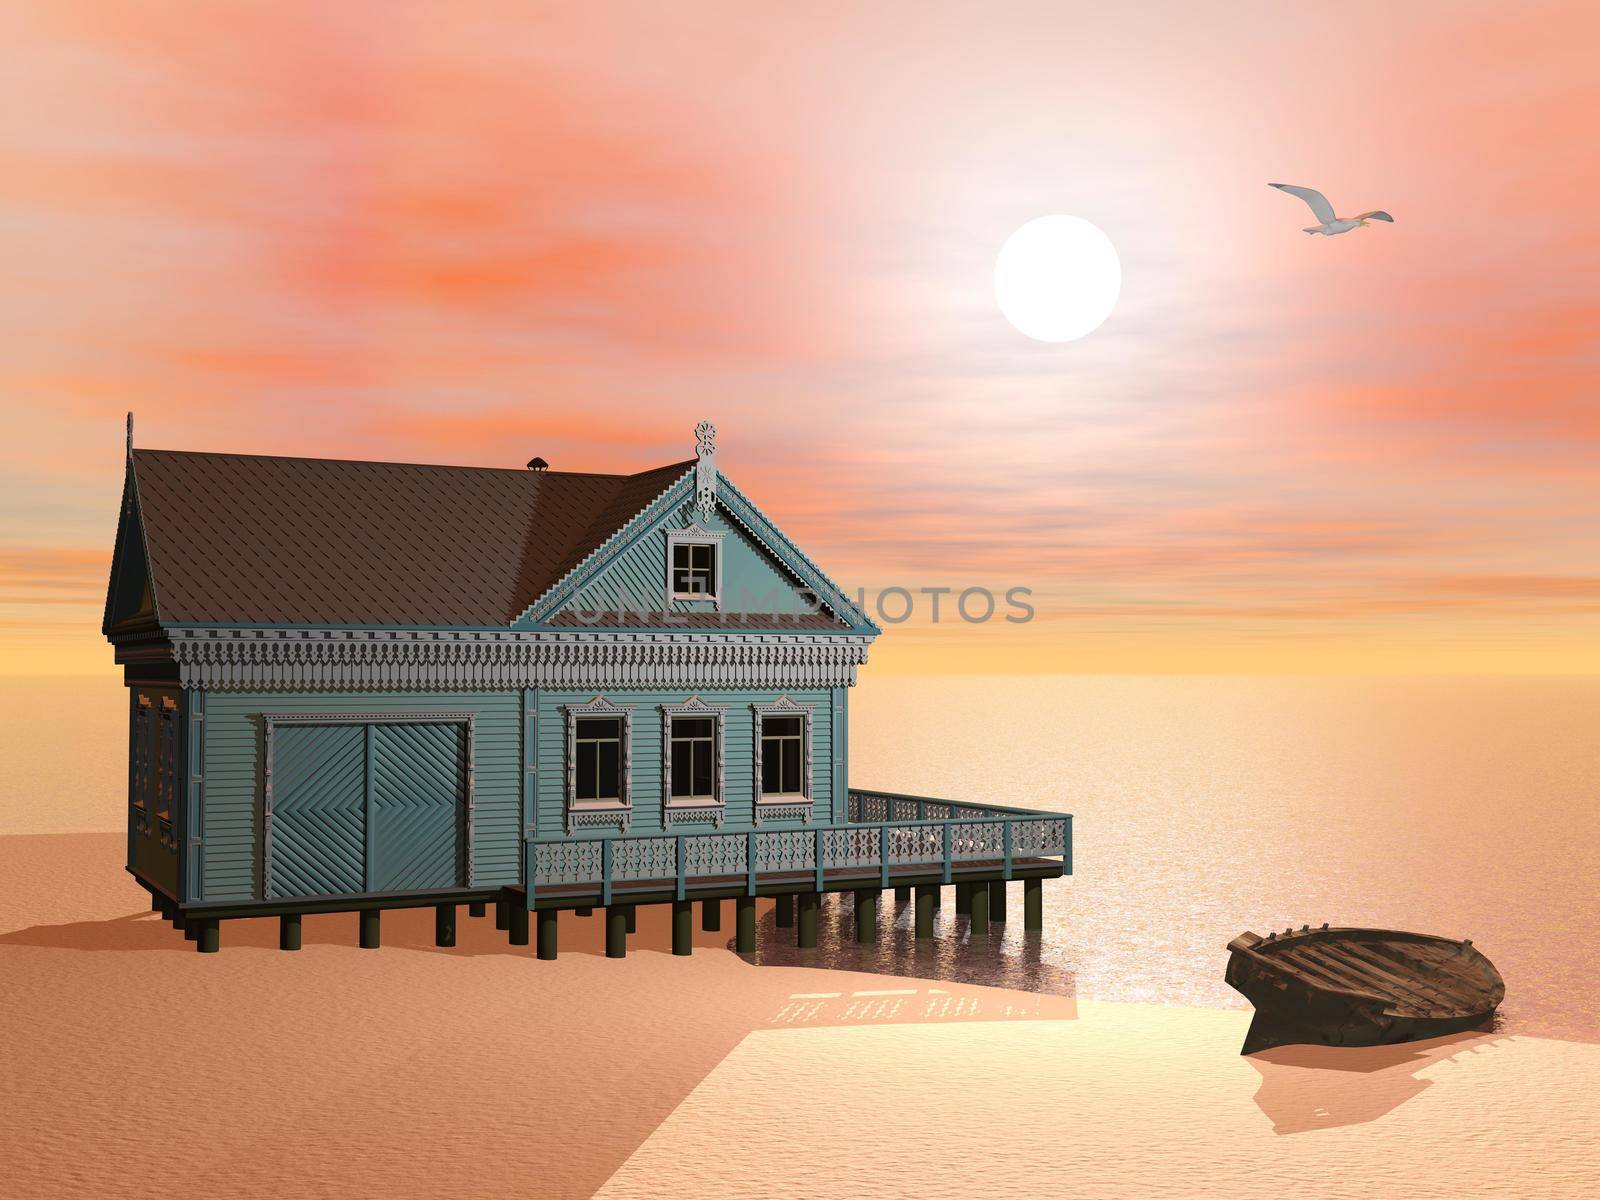 Green house at the beach near a wood boat by sunset with flying bird